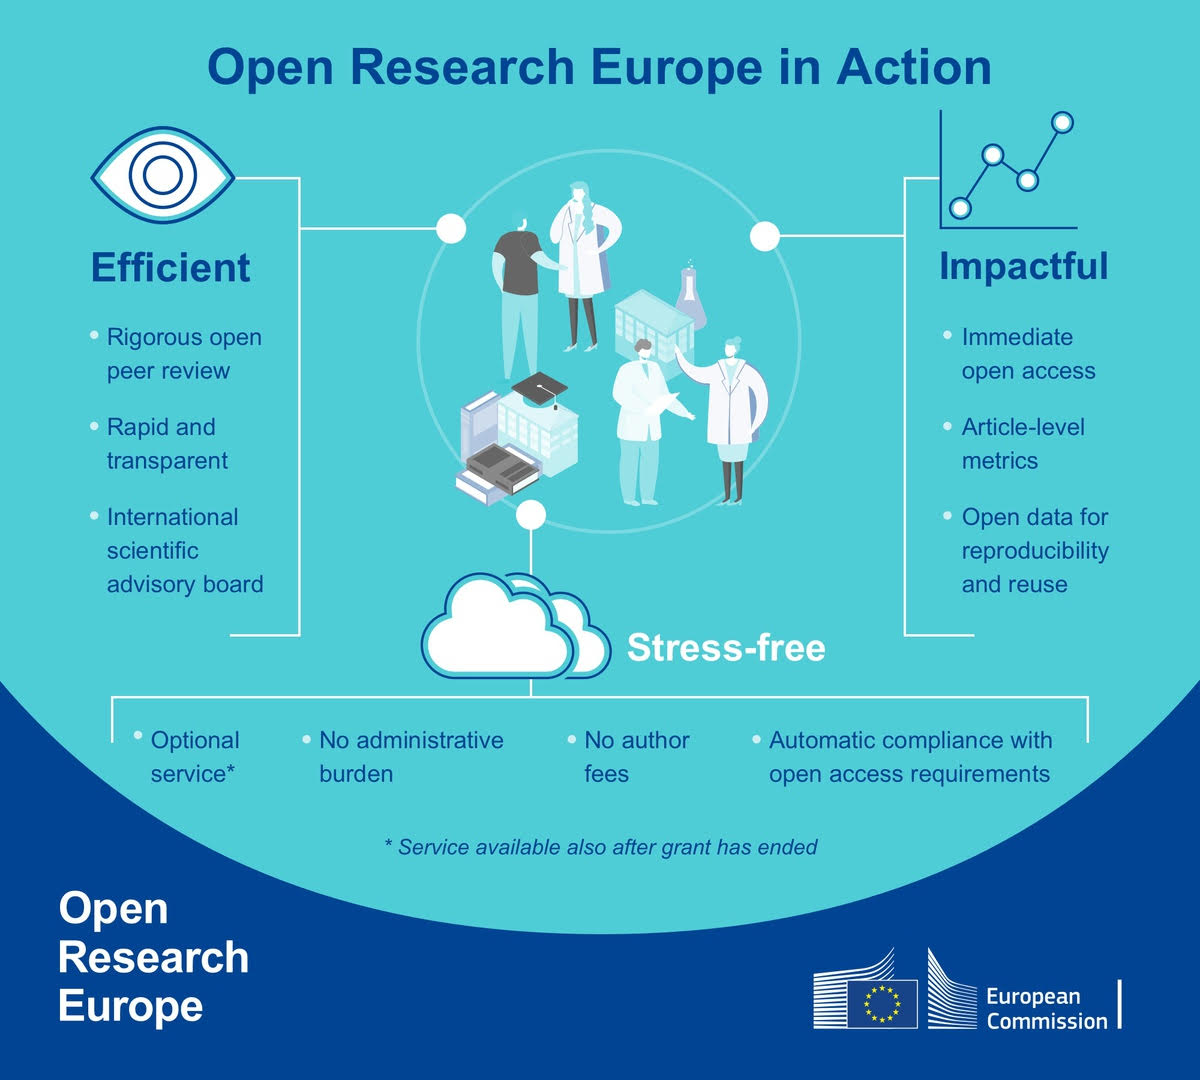 “Open Research Europe”